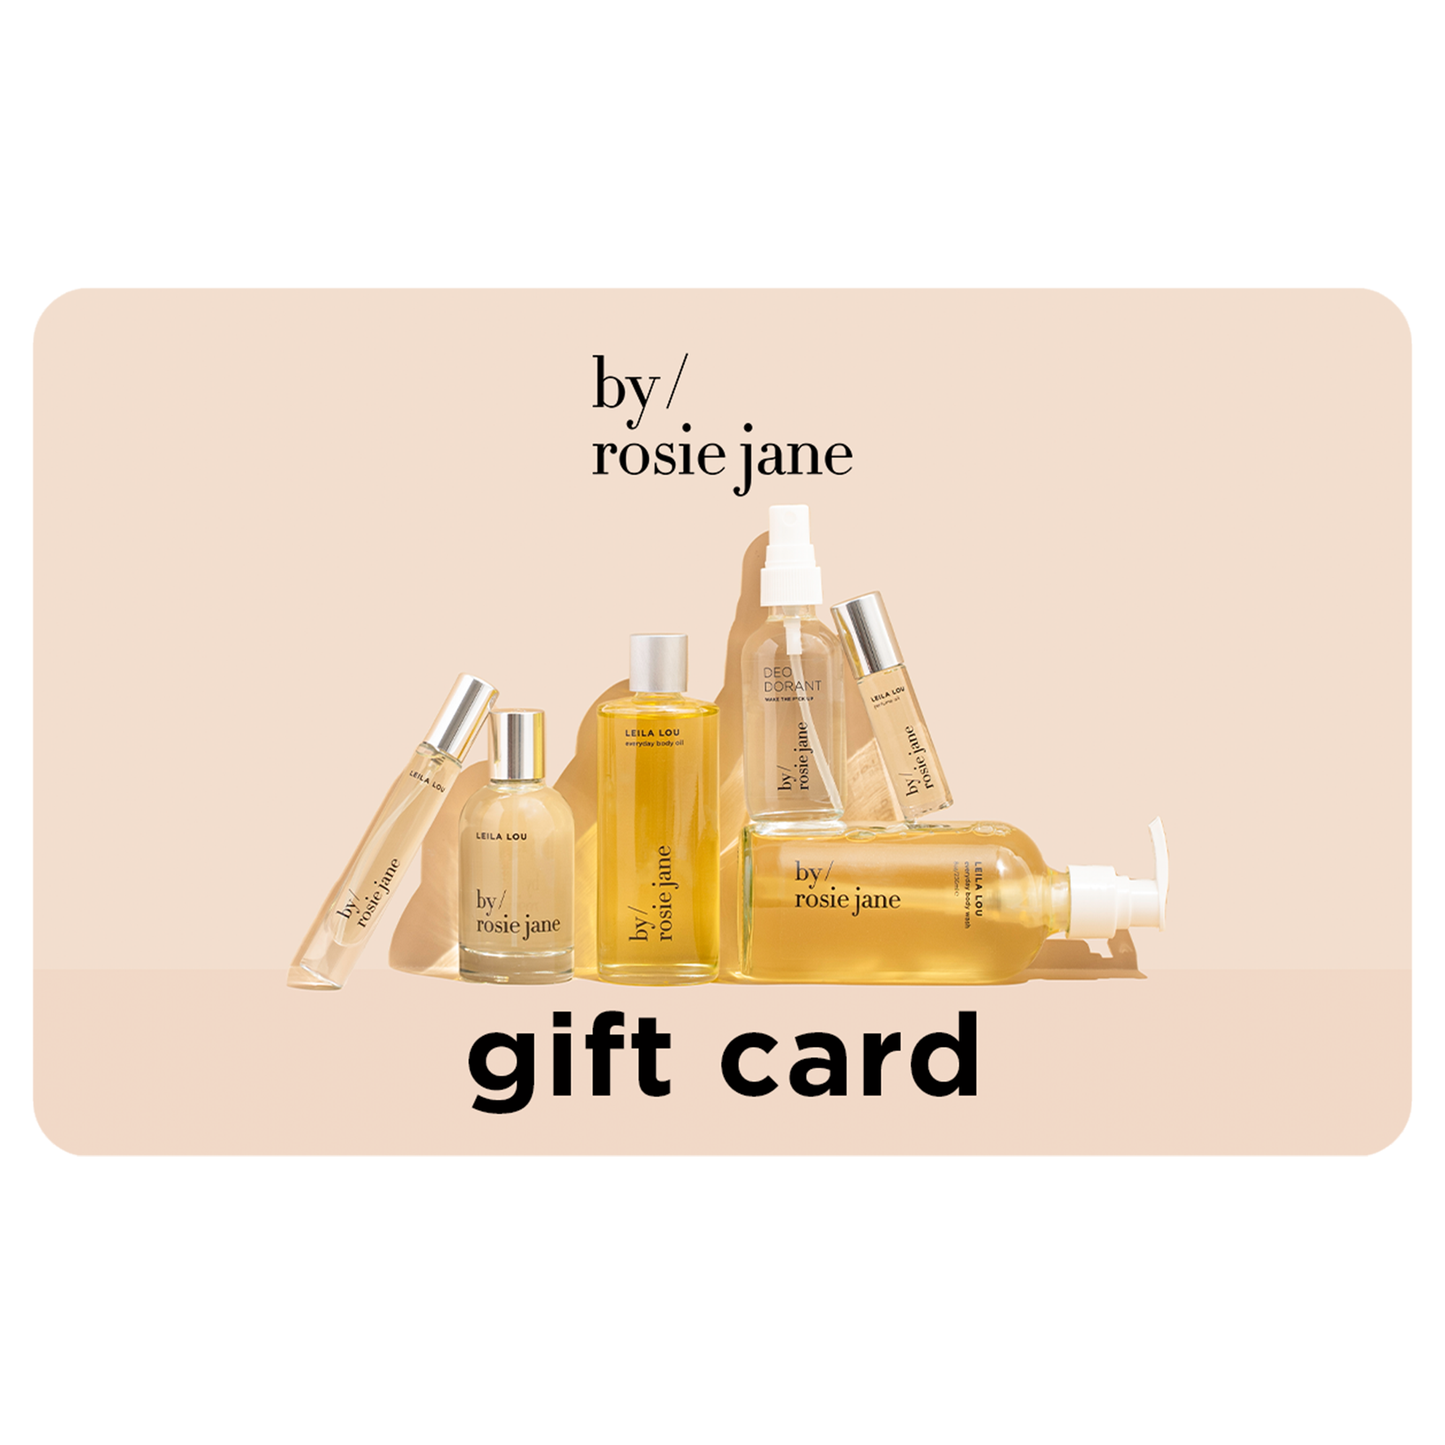 Fragrance Discovery Set + $75 E-Gift Card